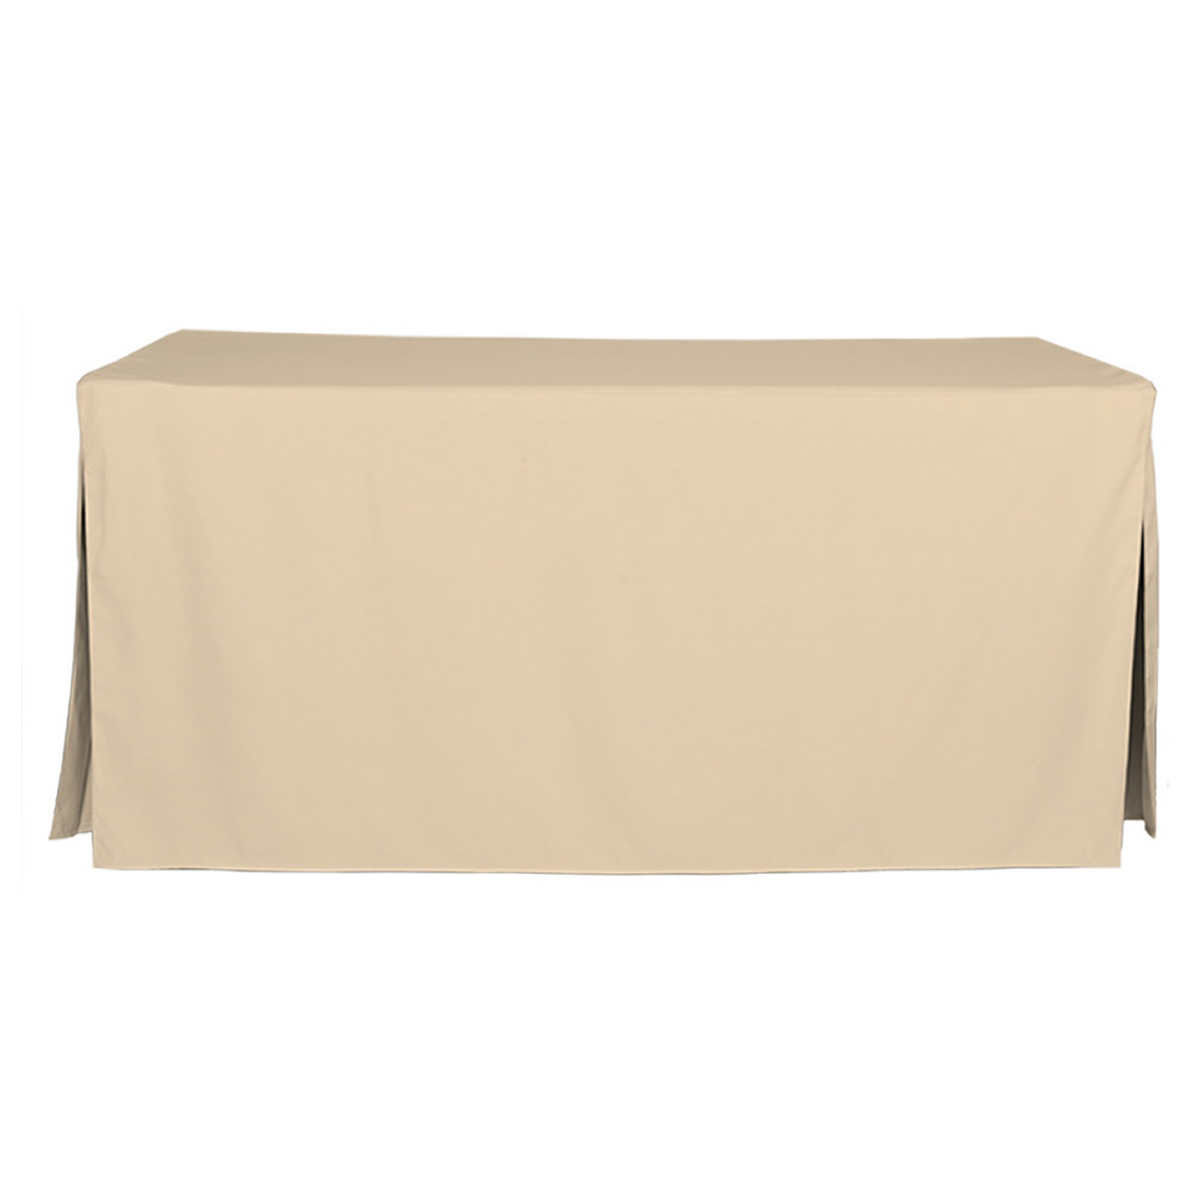 Rectangular Table Cloth Costco, How Big Of A Tablecloth For 6ft Table